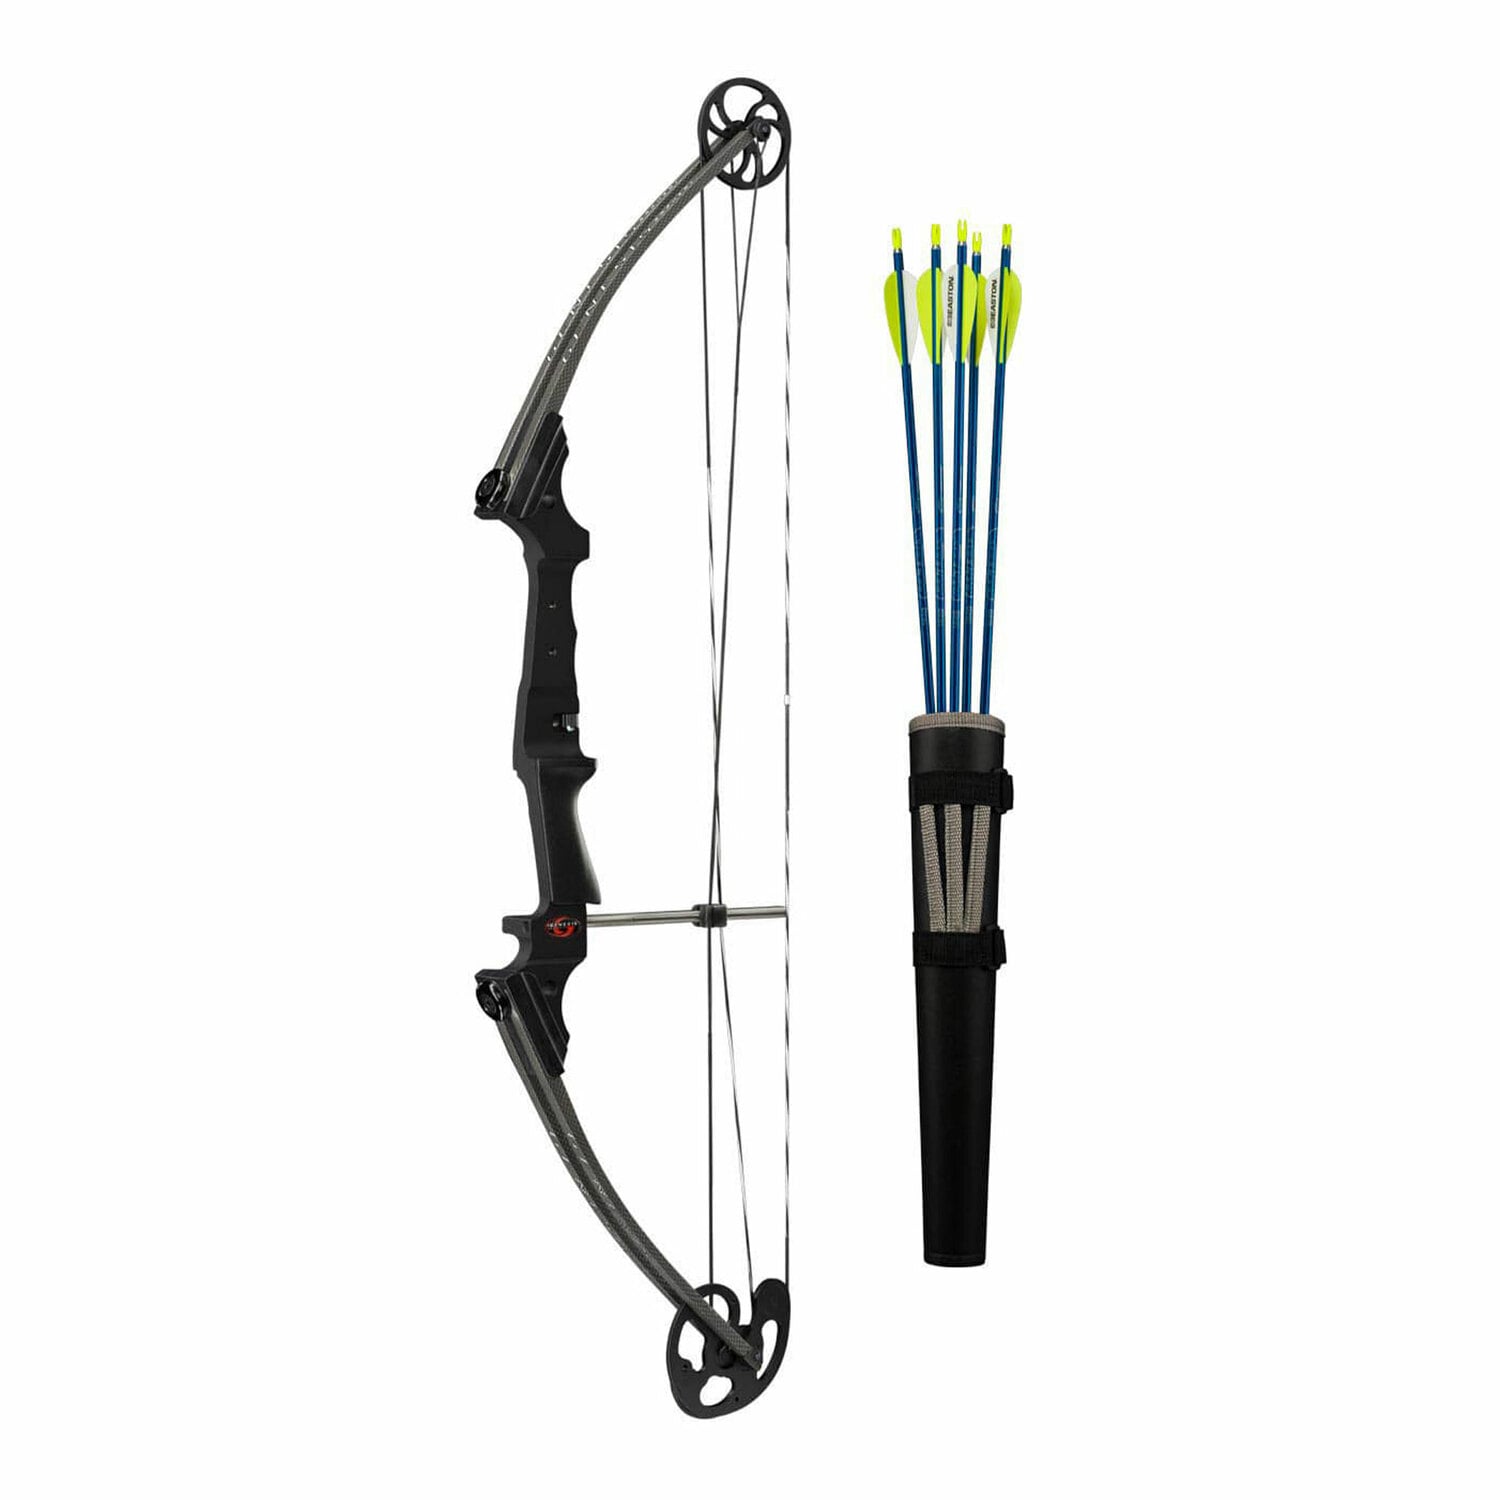 Genesis Archery Universal Fit Compound Bow for Archery Target